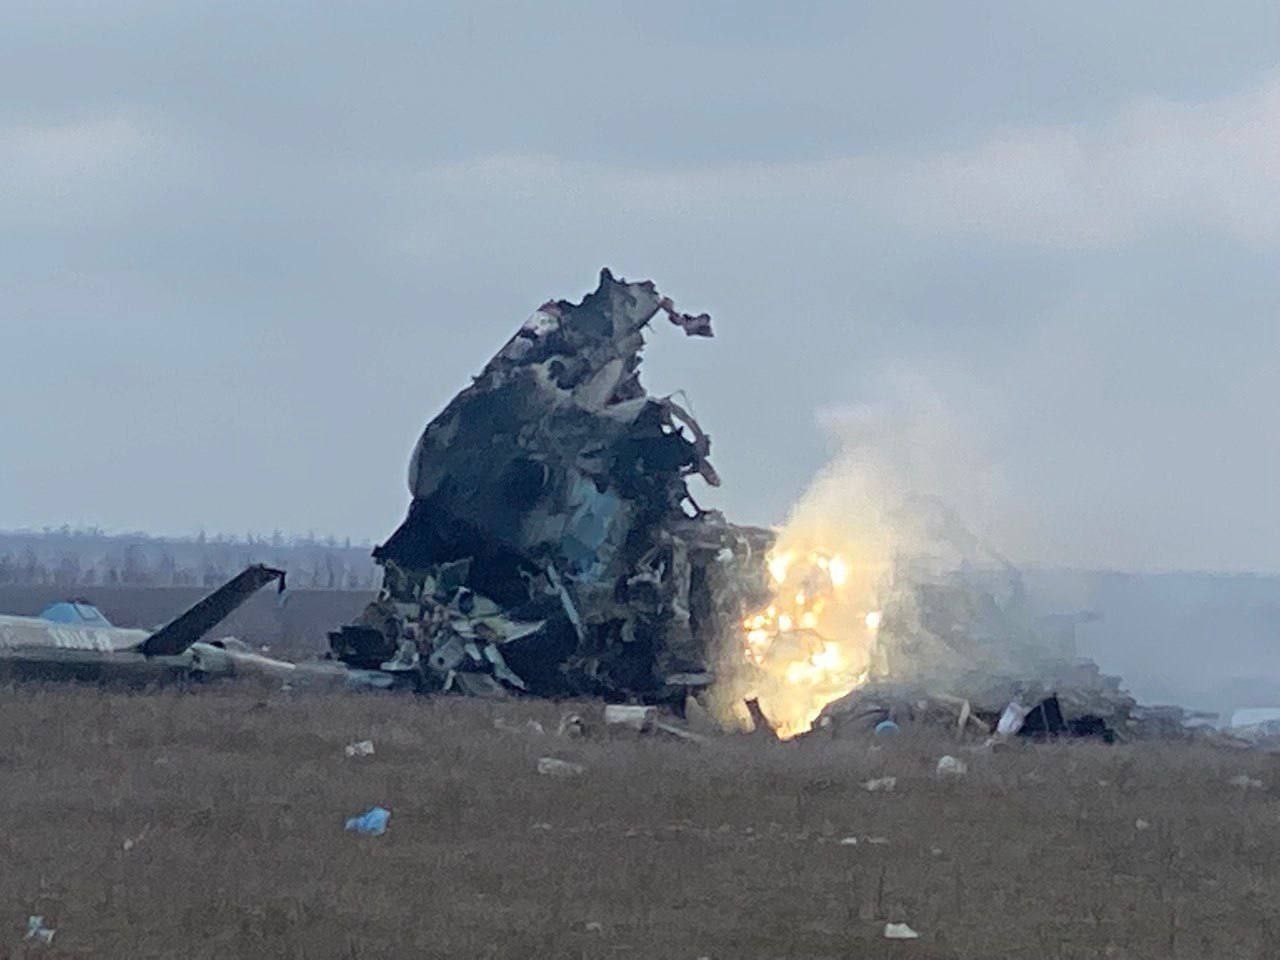 Defense Express, Ukrainian anti-aircraft warfare systems keep keep defense against enemy's aircrafts, Two Russian Military Planes Shot Down in 40 min Over Kyiv, Ukrainian Air Forces